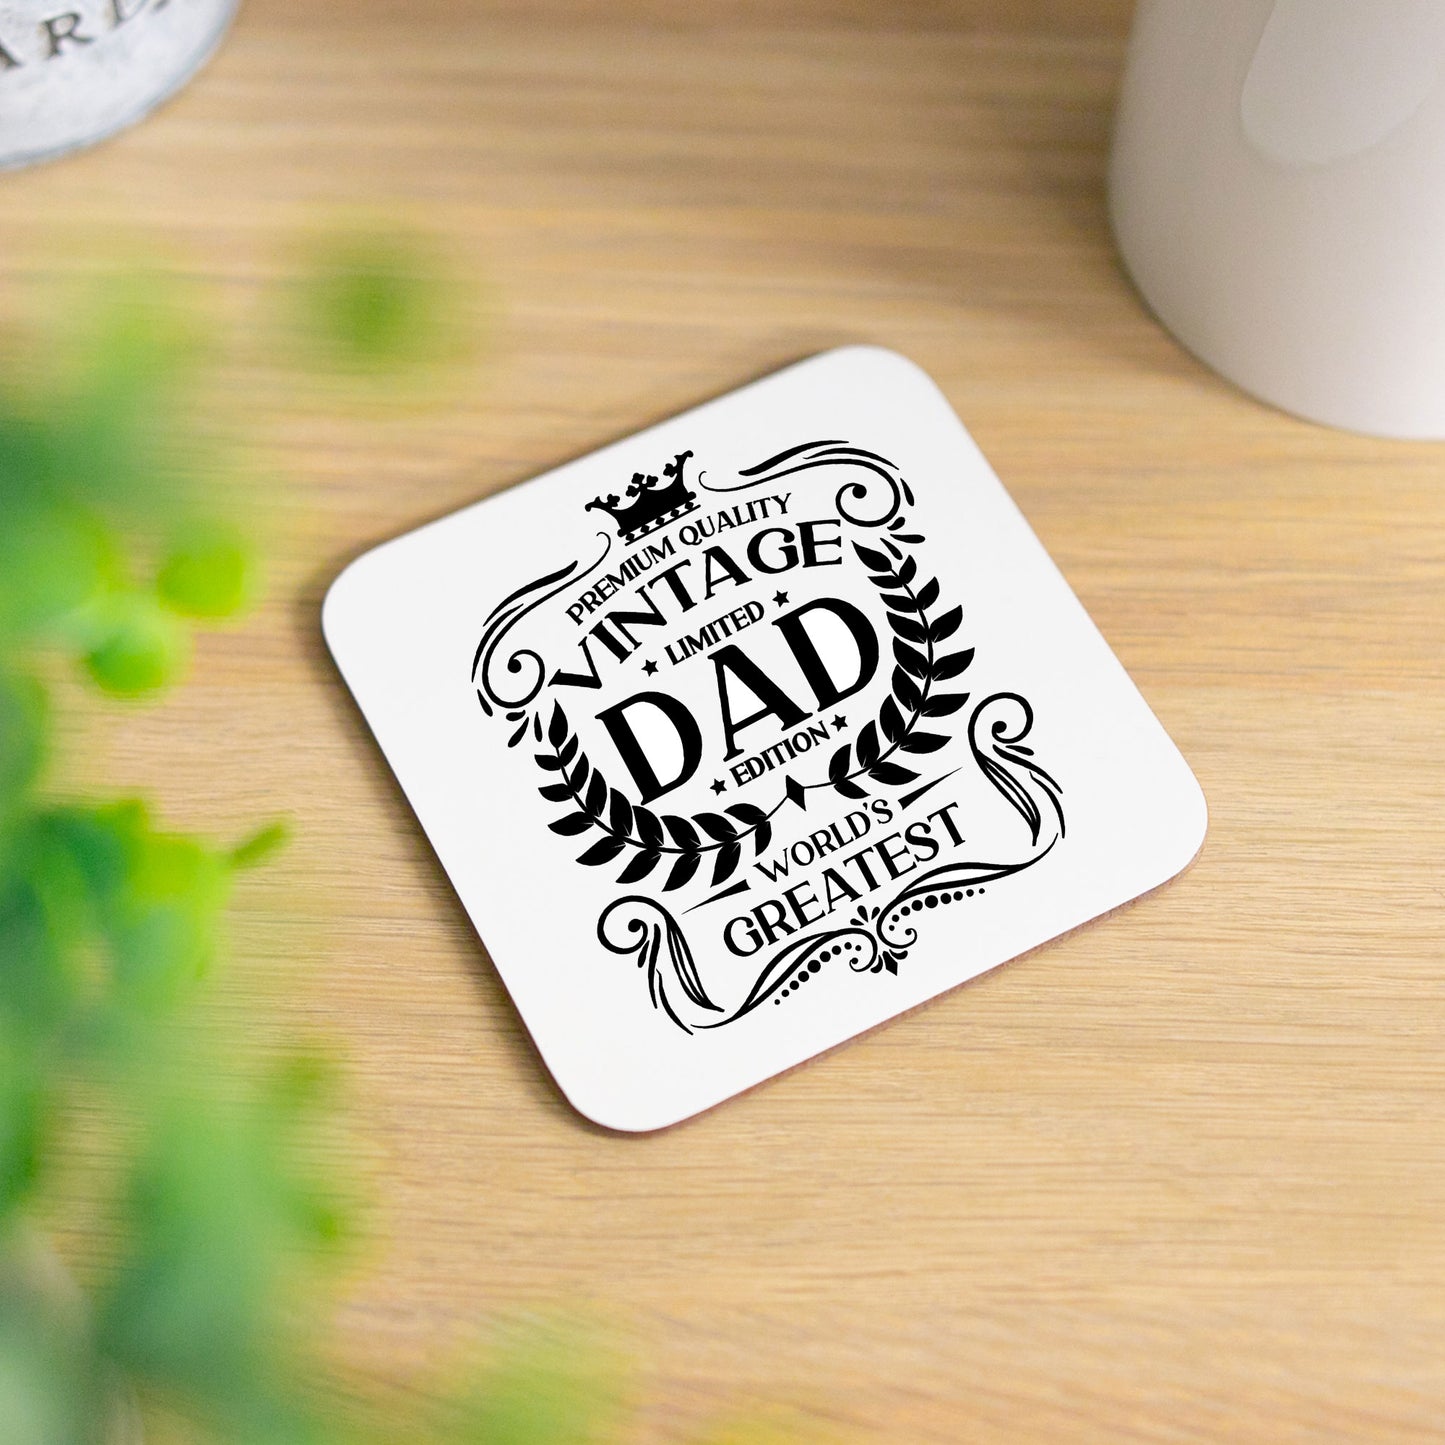 Vintage Worlds Greatest Dad Mug and/or Coaster  - Always Looking Good - Printed Coaster On Its Own  